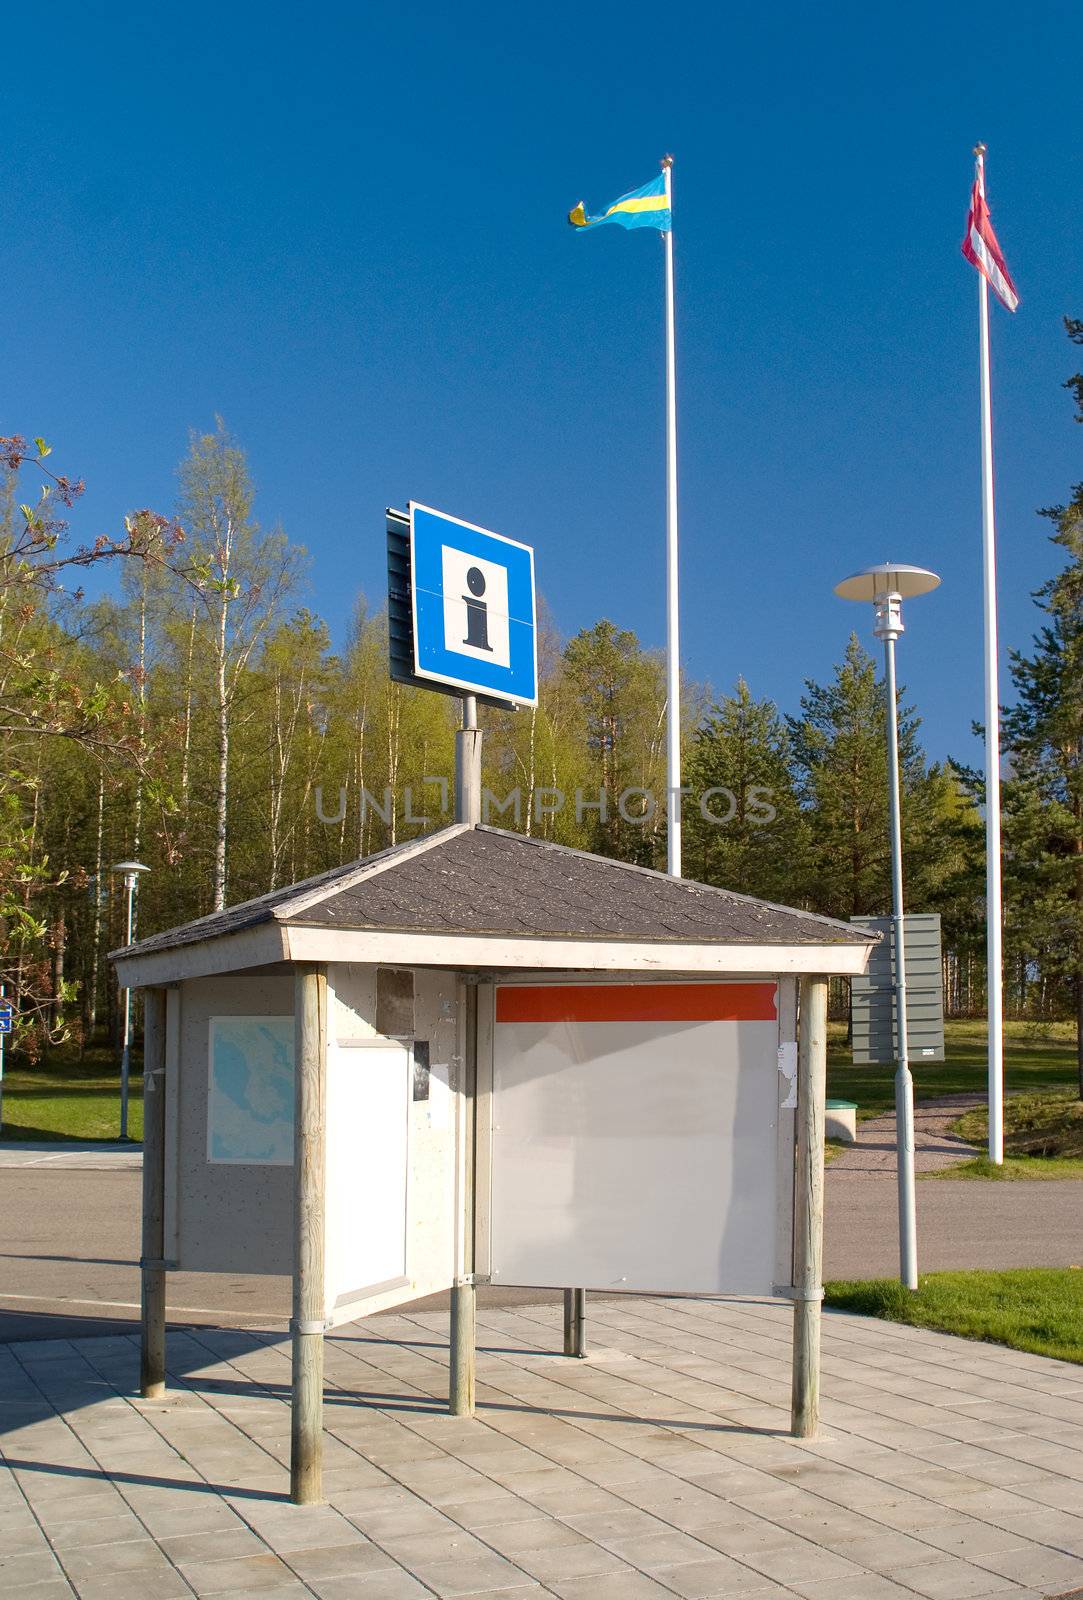 Information board with the flags of Sweden and Denmark